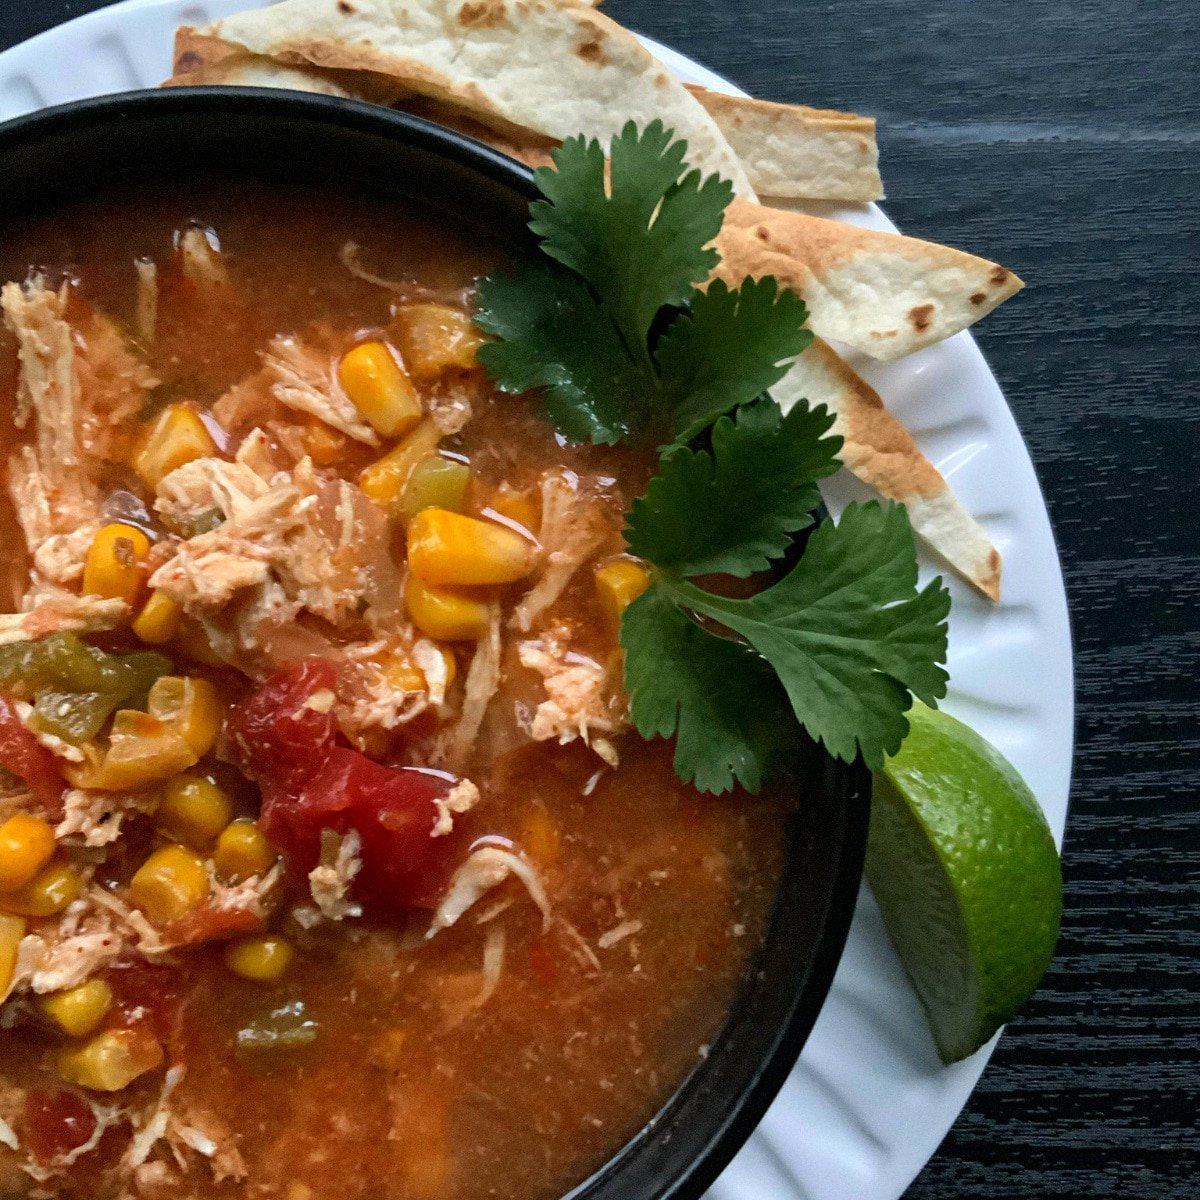 Chicken tortilla soup in a round black bowl garnished with green cilantro, a wedge of lime and some toasted tortilla strips